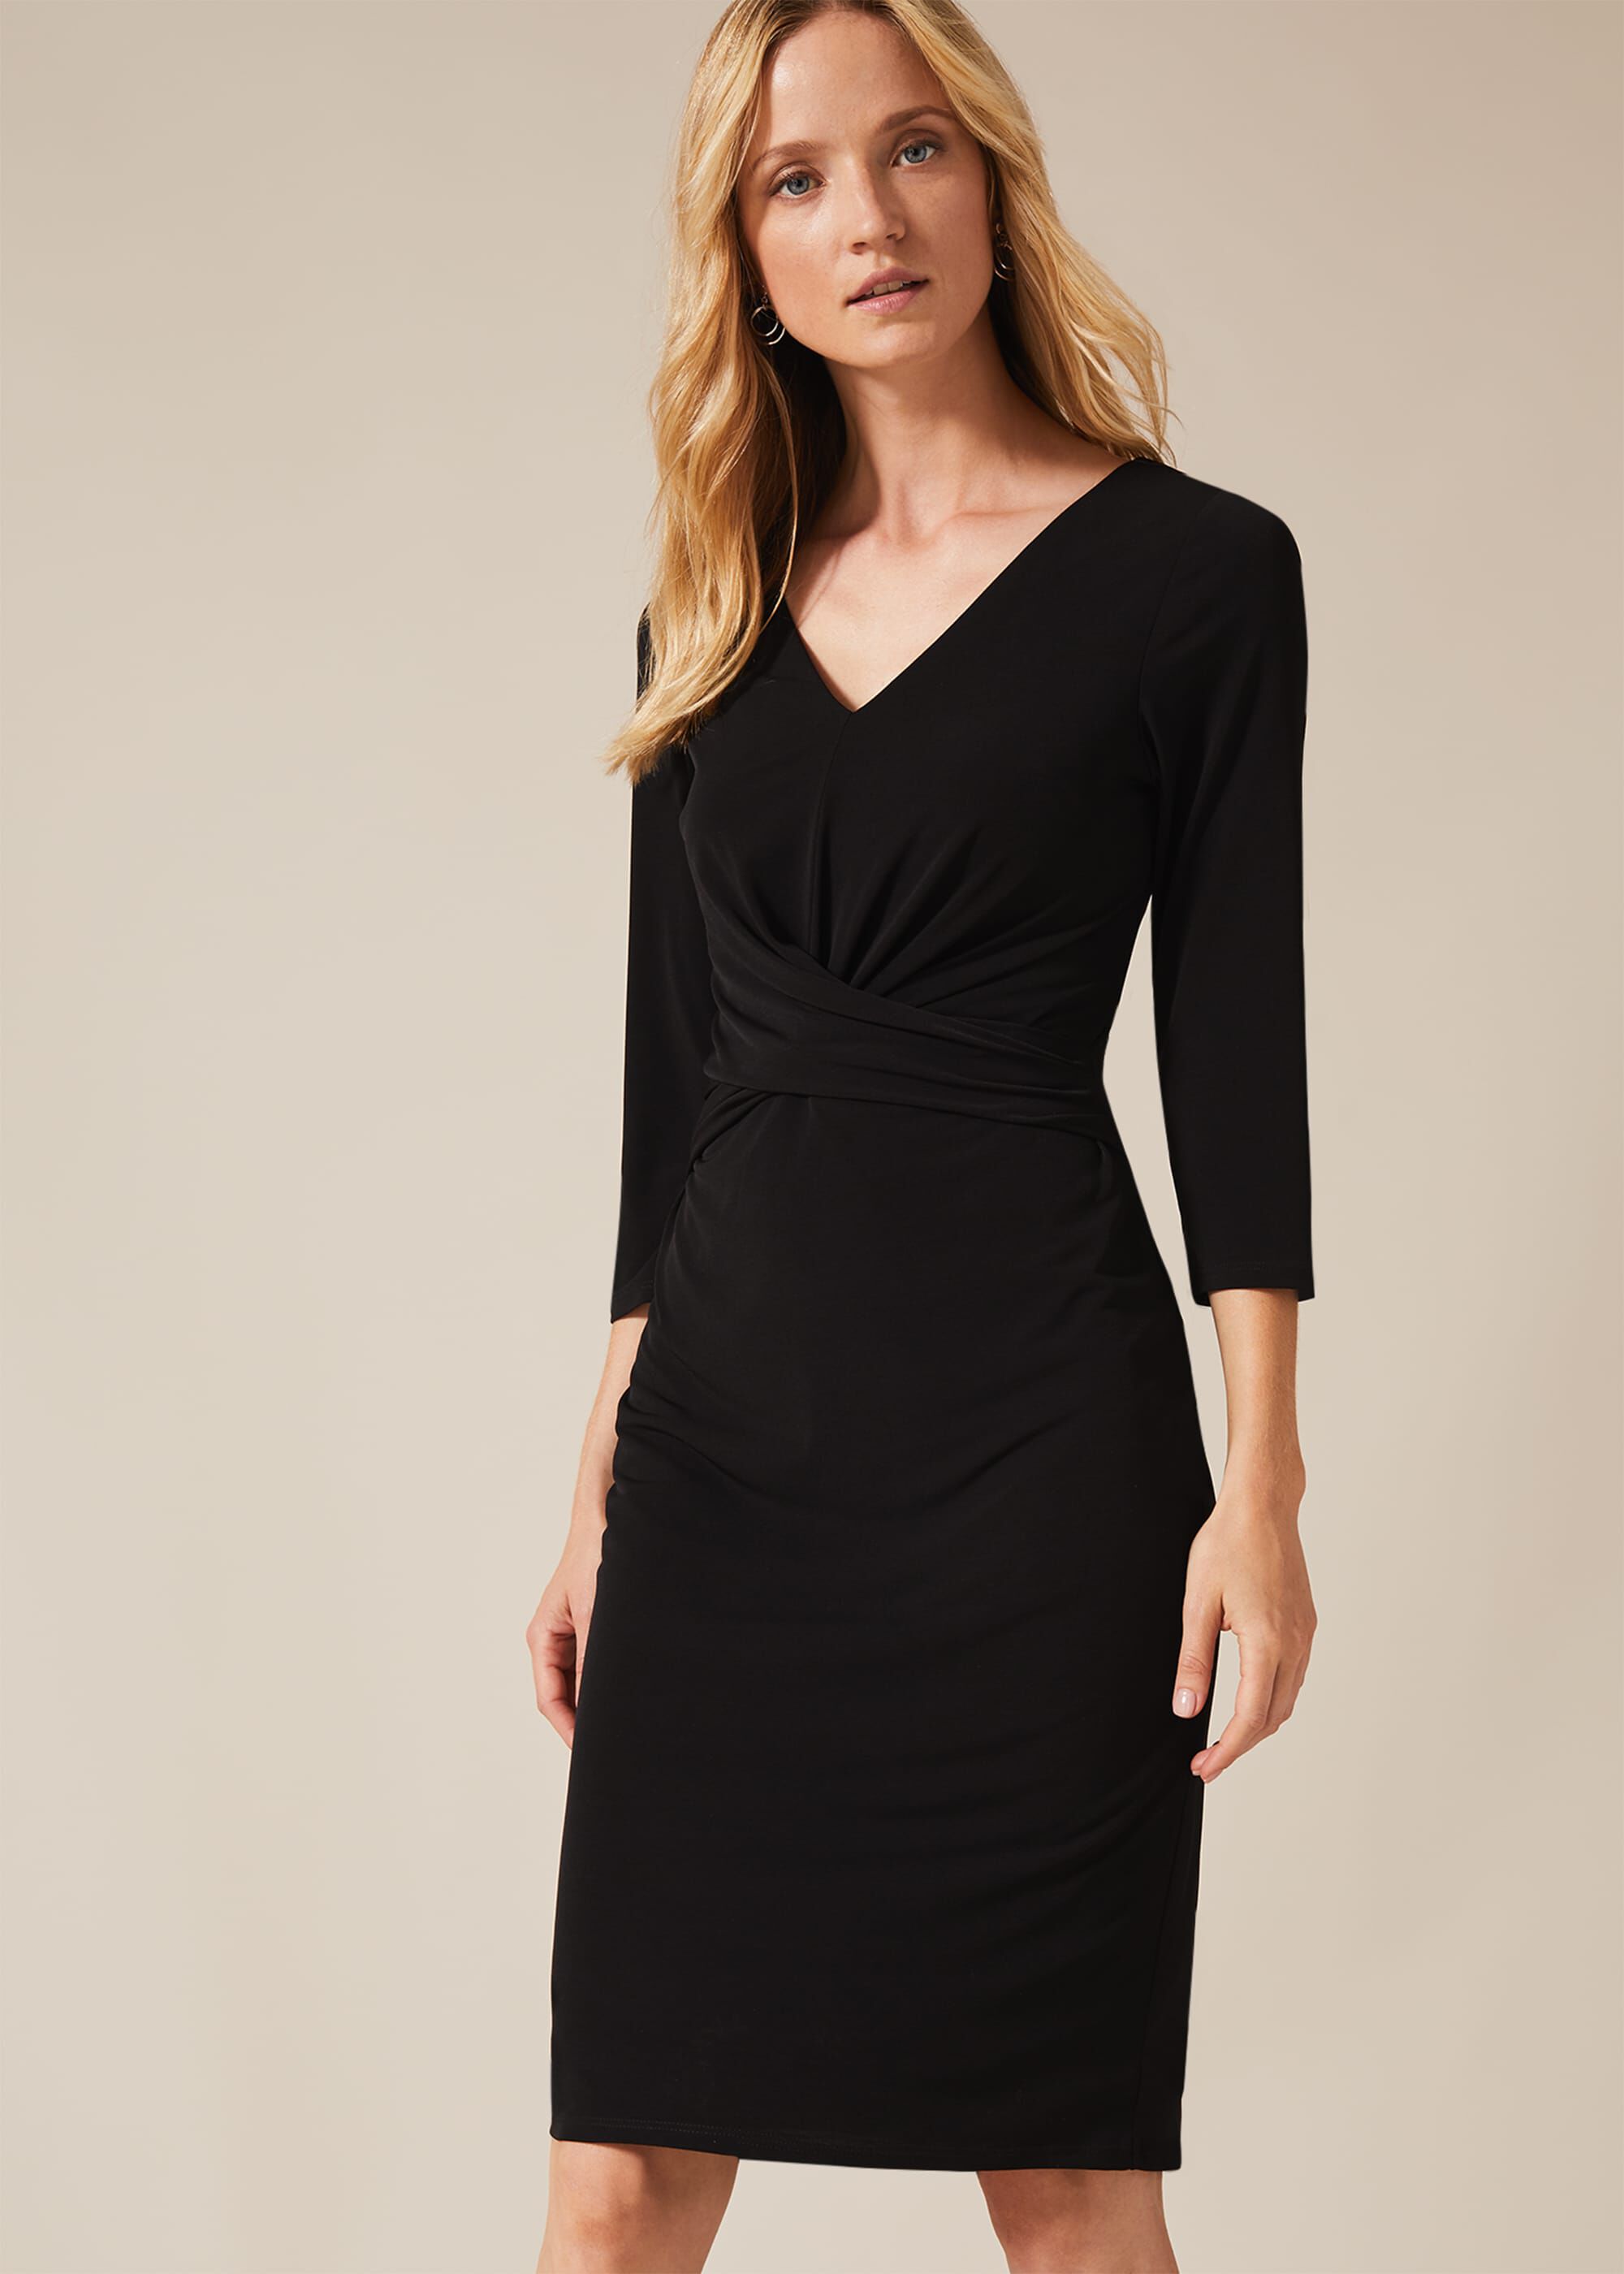 Selima Twist Front Dress | Phase Eight